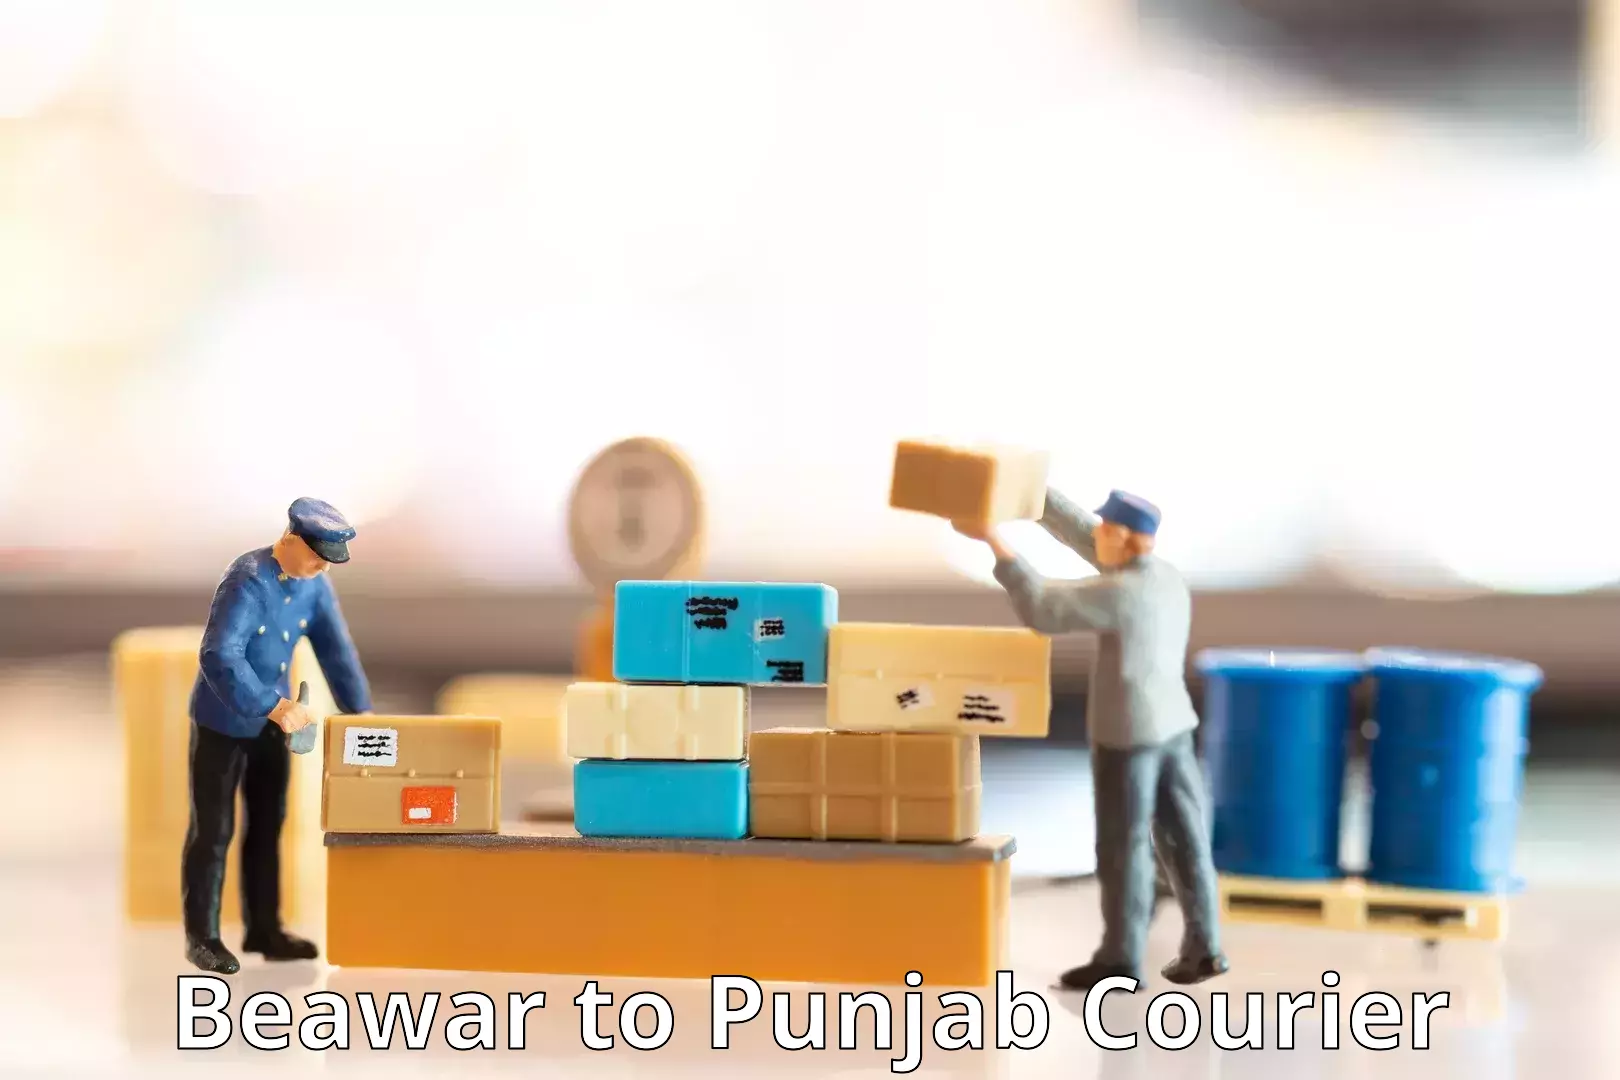 Quality courier services Beawar to Amritsar